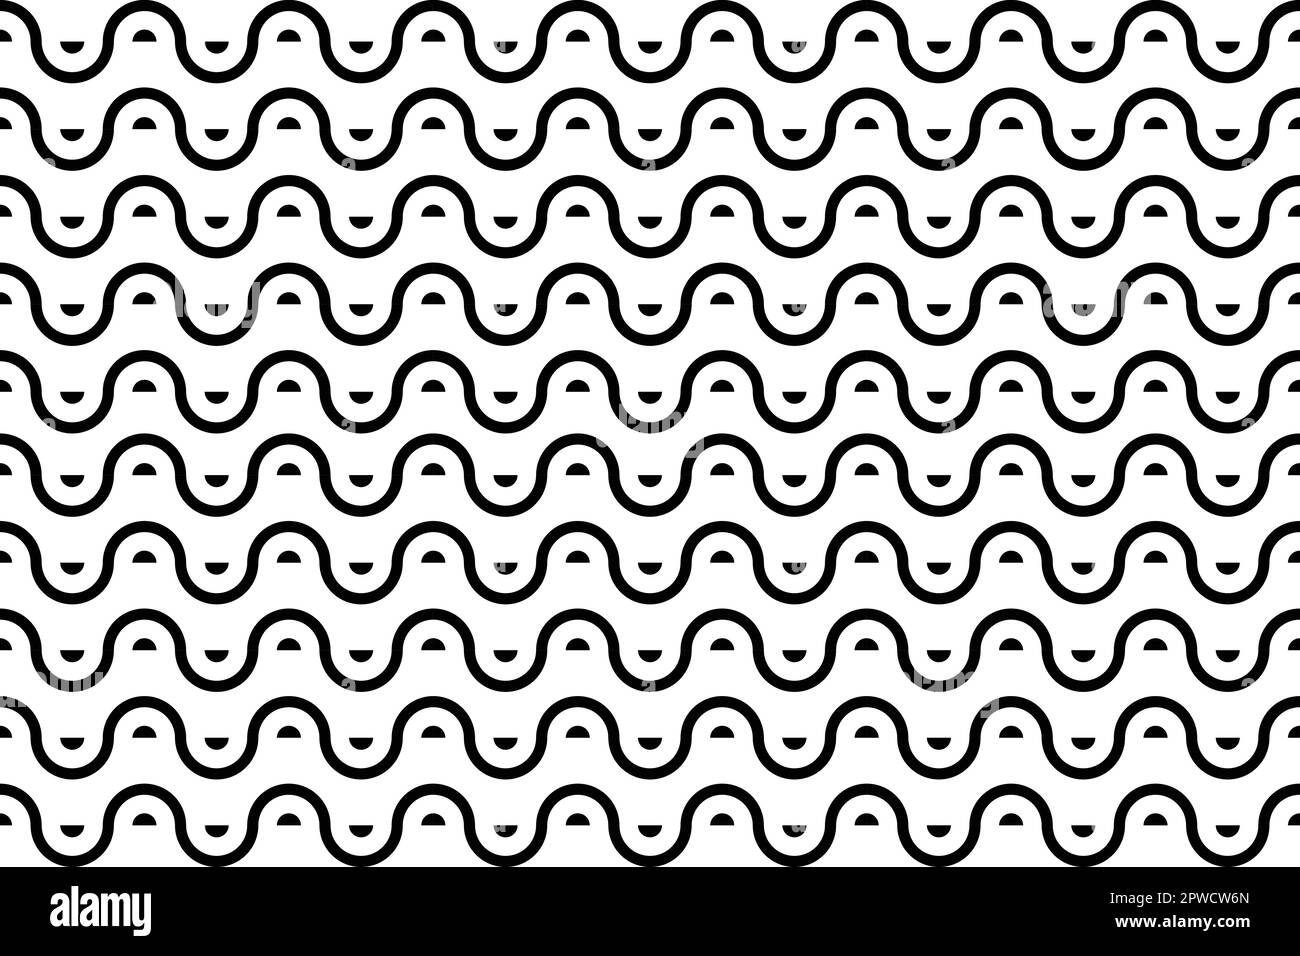 monochrome vector. game with black and white colors of the rainbow, . lines of same thicknesses. repeating elements. straight and wavy lines. abstract picture. movement dynamics. Vector illustration Stock Vector